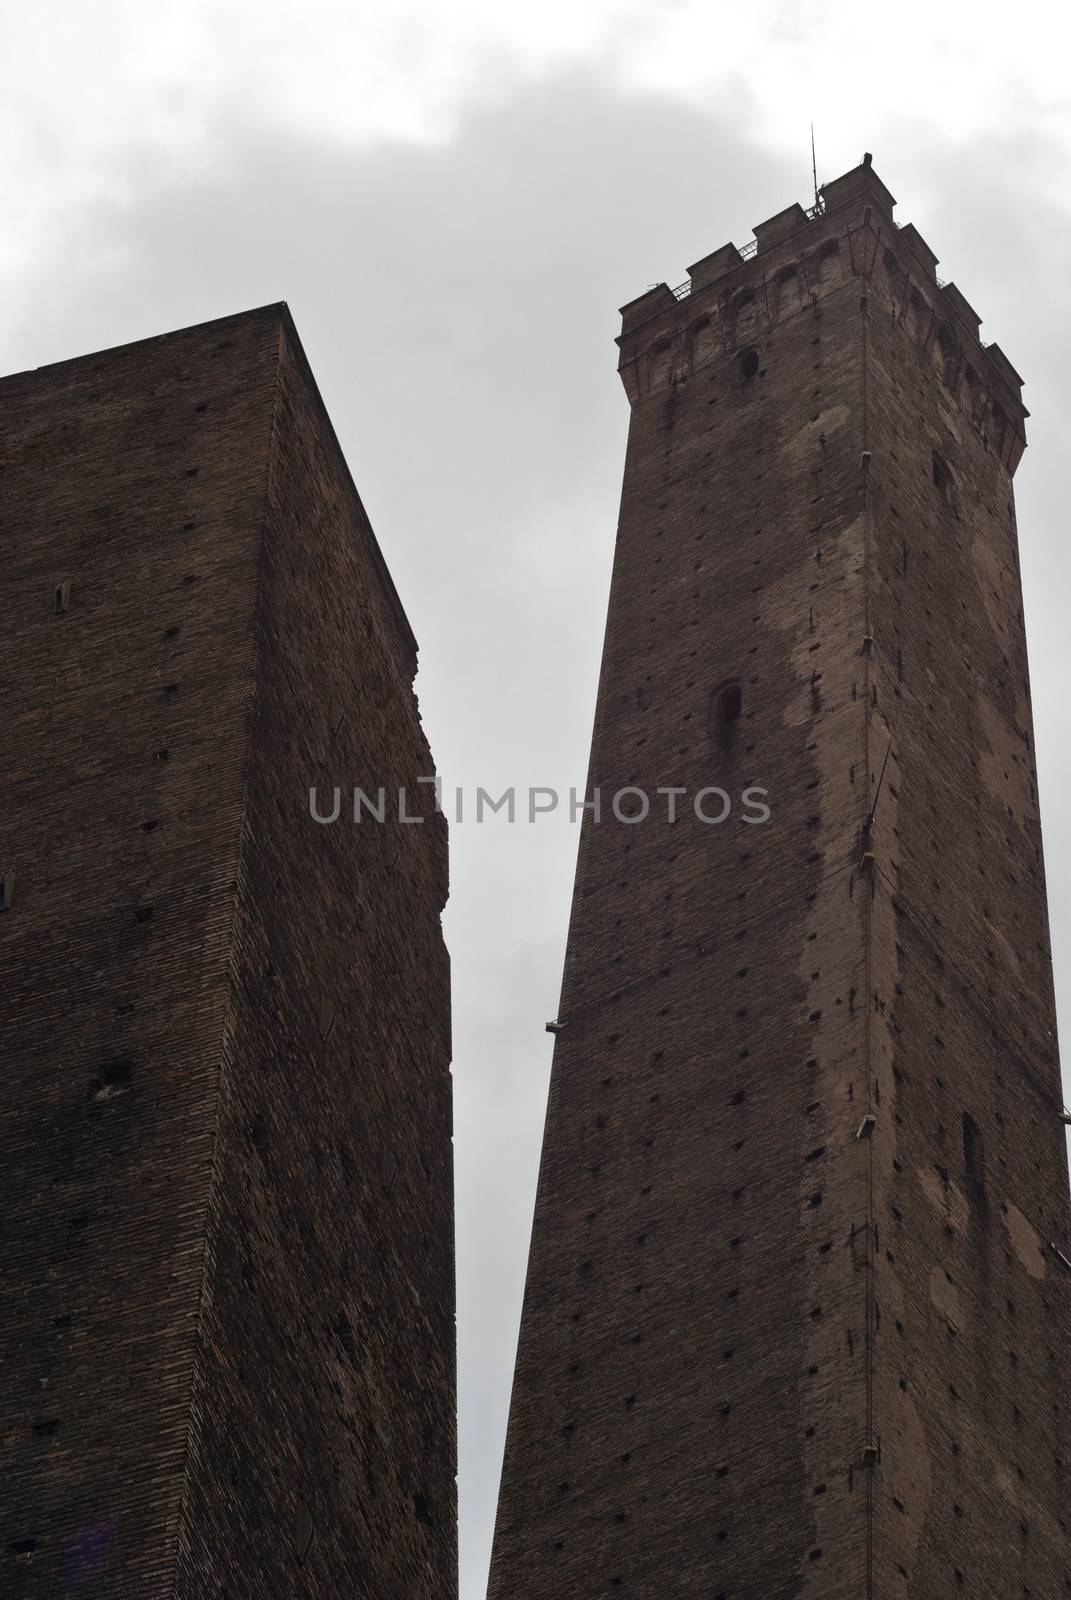 Due Torri - symbol of city under cloudy sky in Bologna, Italy